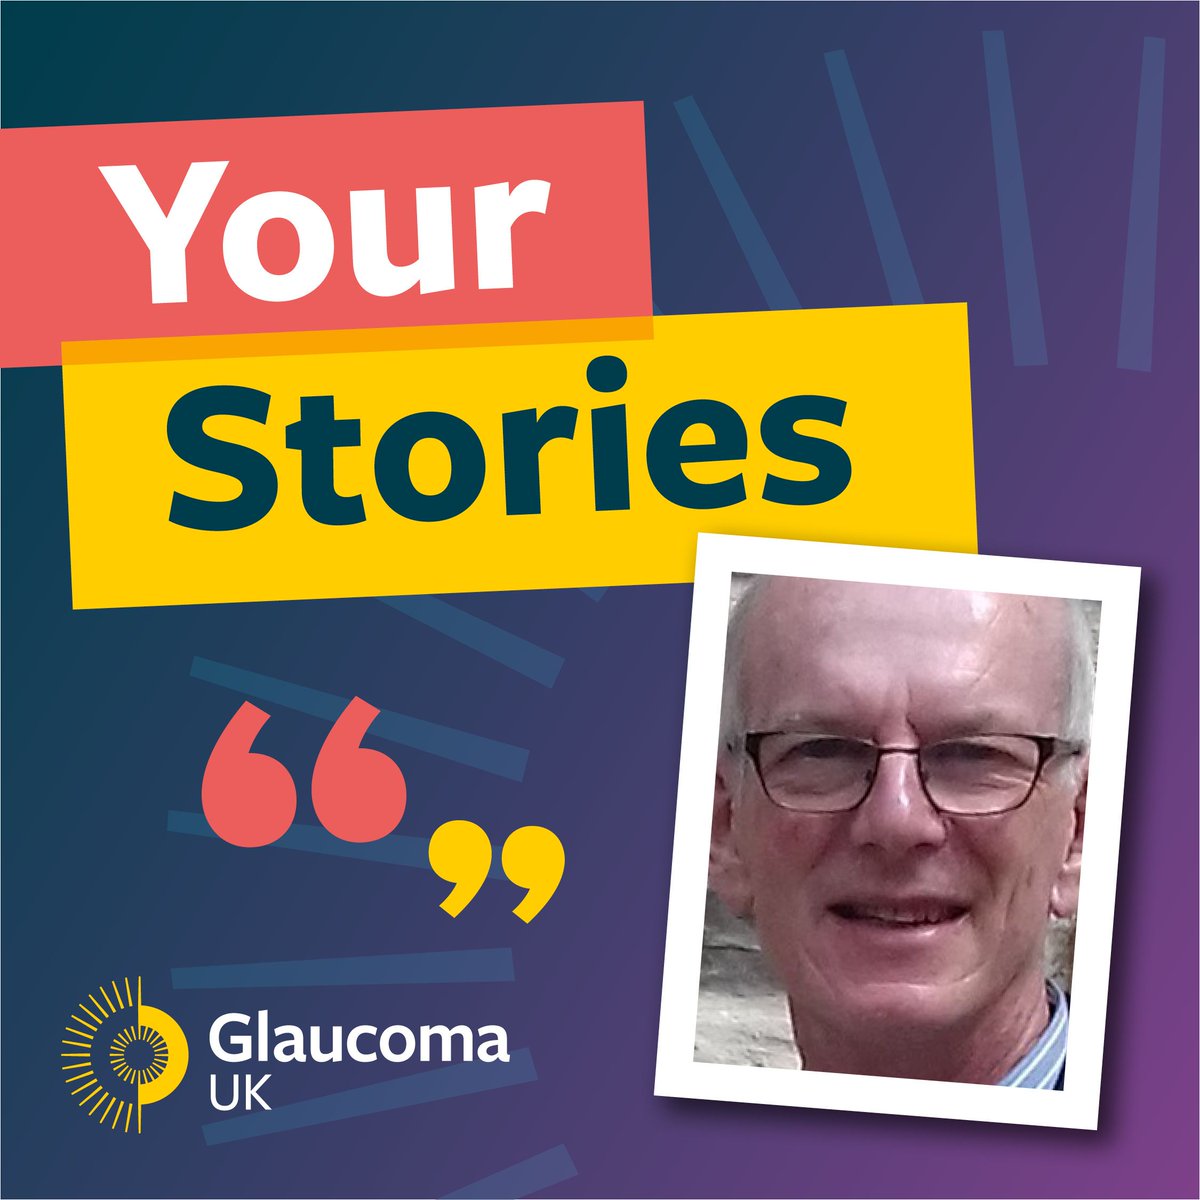 'I feel very fortunate that my high eye pressures were picked up before any damage was done to my optic nerves.' Roger found out he had high pressures at a routine eye test. With successful treatment, he has managed to retain good sight. Read his story: buff.ly/3UGQ1Cx